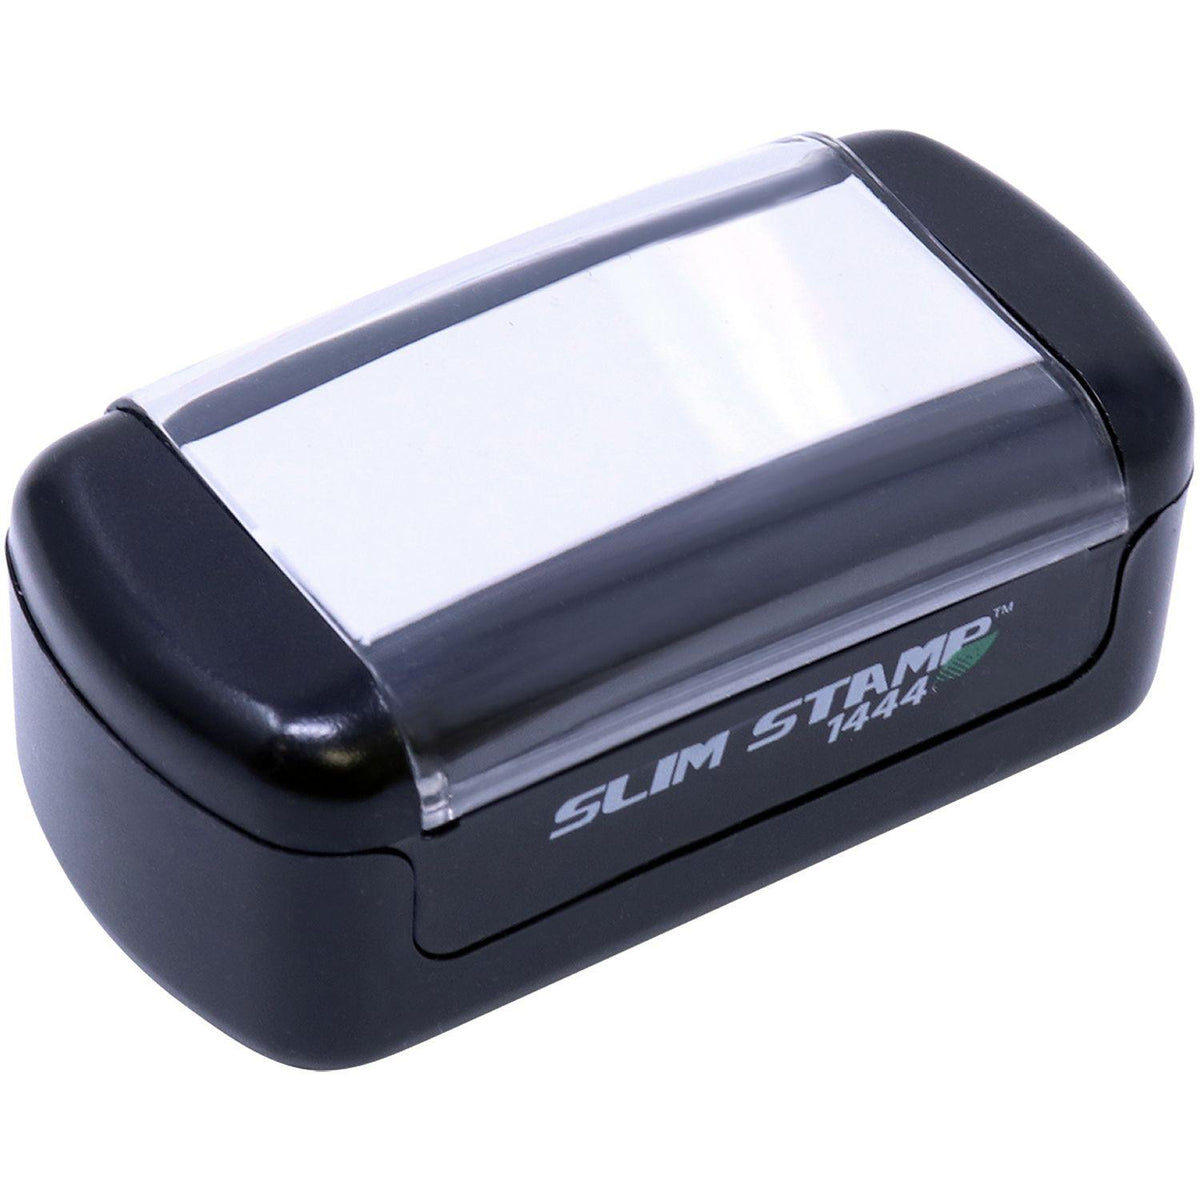 Top Down View of Slim Pre Inked Wire Transfer Stamp